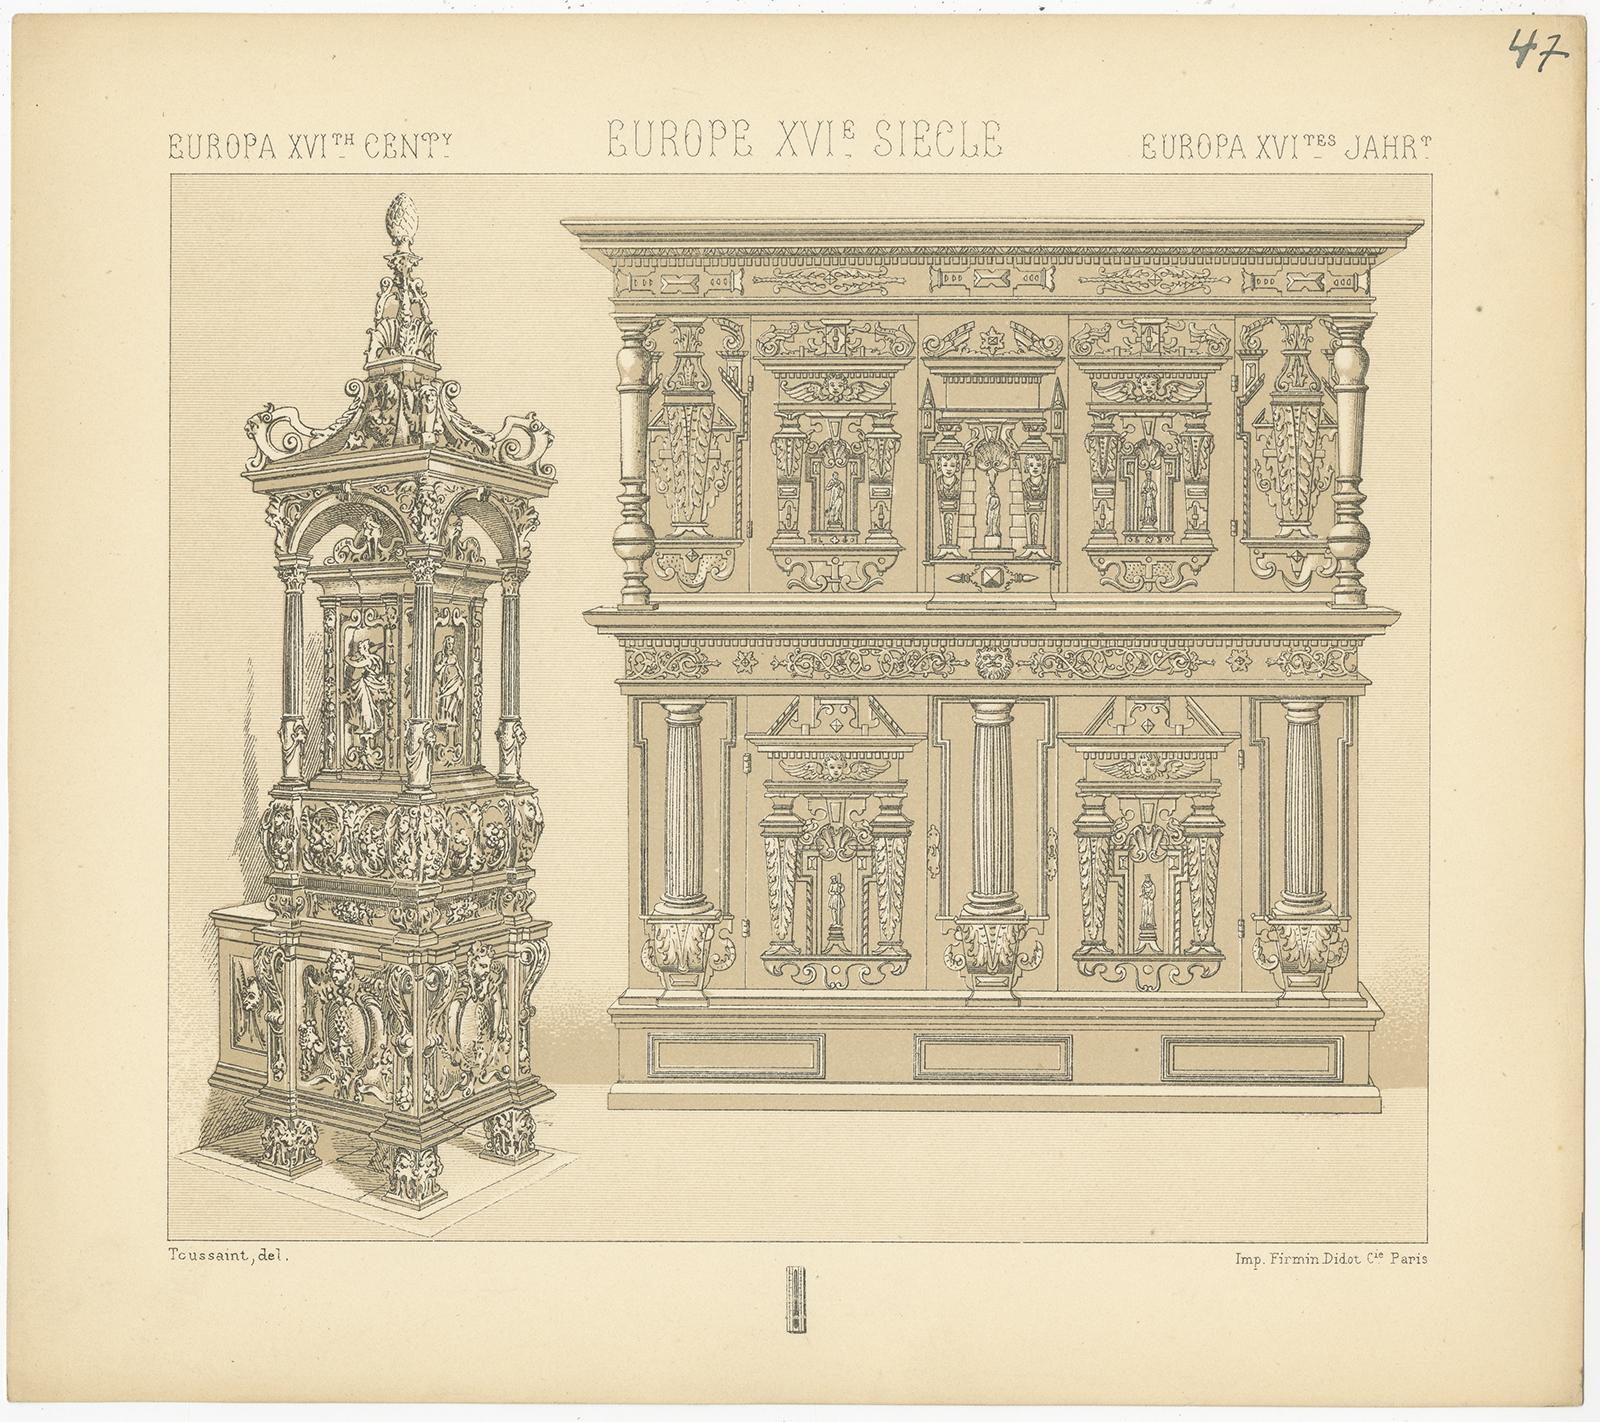 Antique print titled 'Europa XVIth Cent - Europe XVIe, Siecle - Europa XVItes Jahr'. Chromolithograph of European XVIth Century Decorative Objects. This print originates from 'Le Costume Historique' by M.A. Racinet. Published, circa 1880.